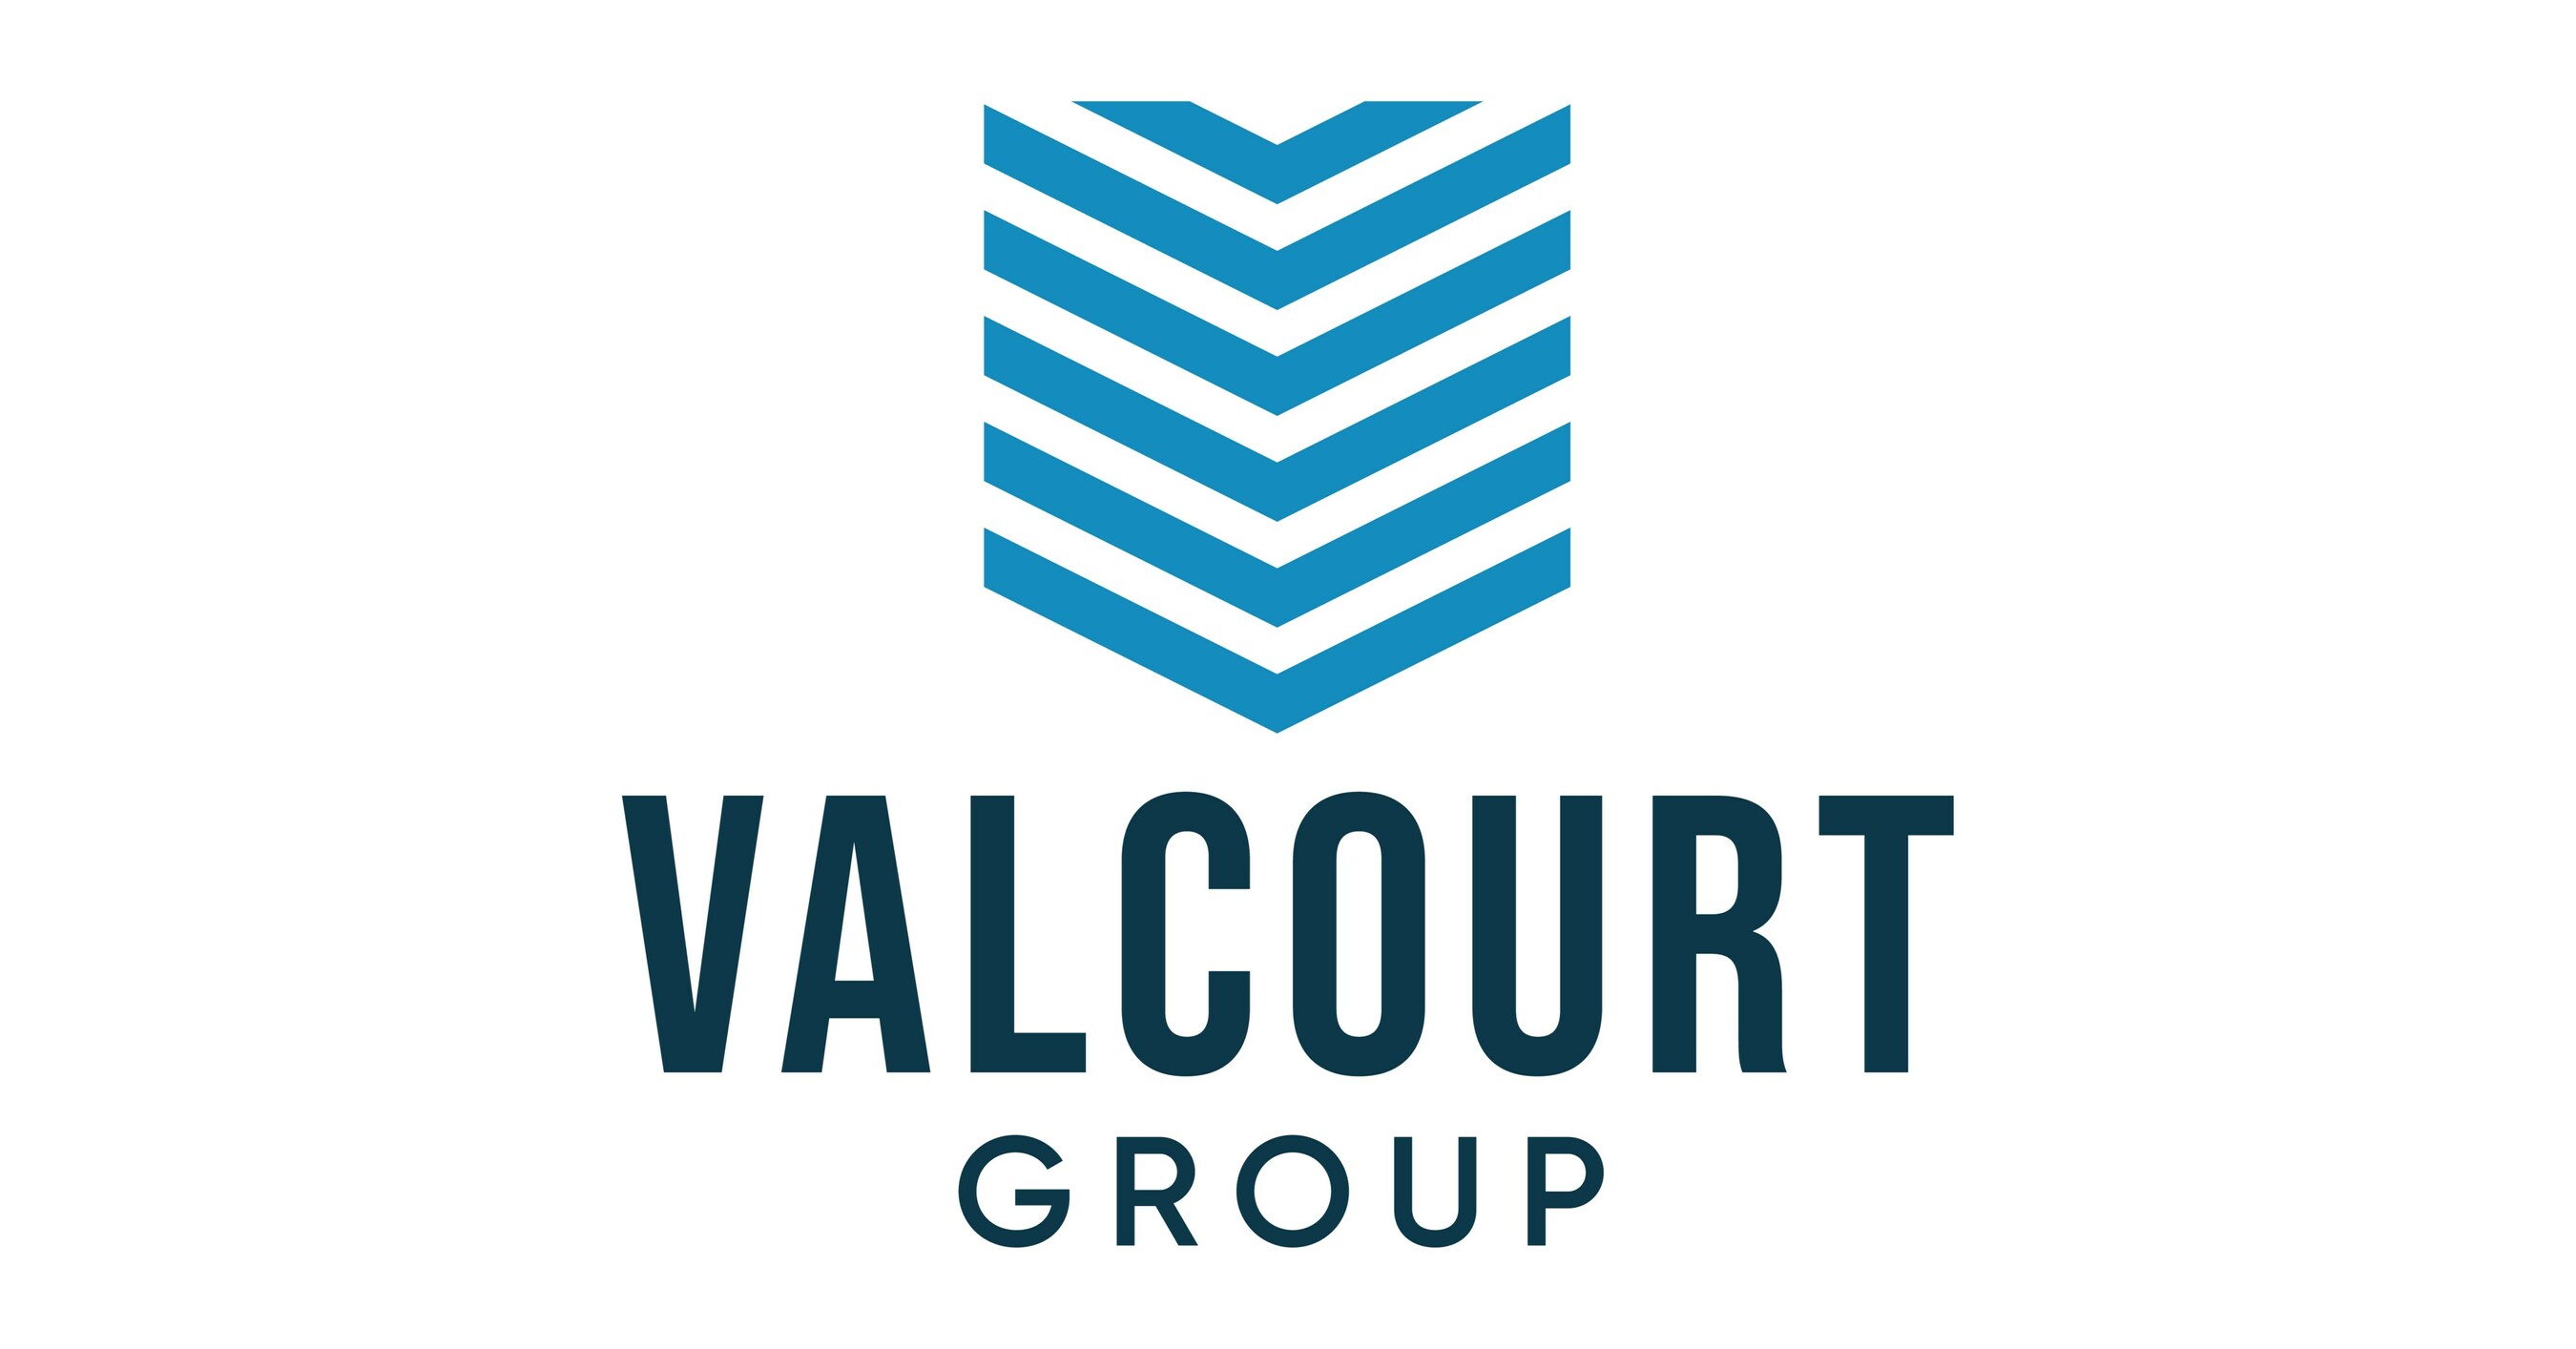 The Valcourt Group